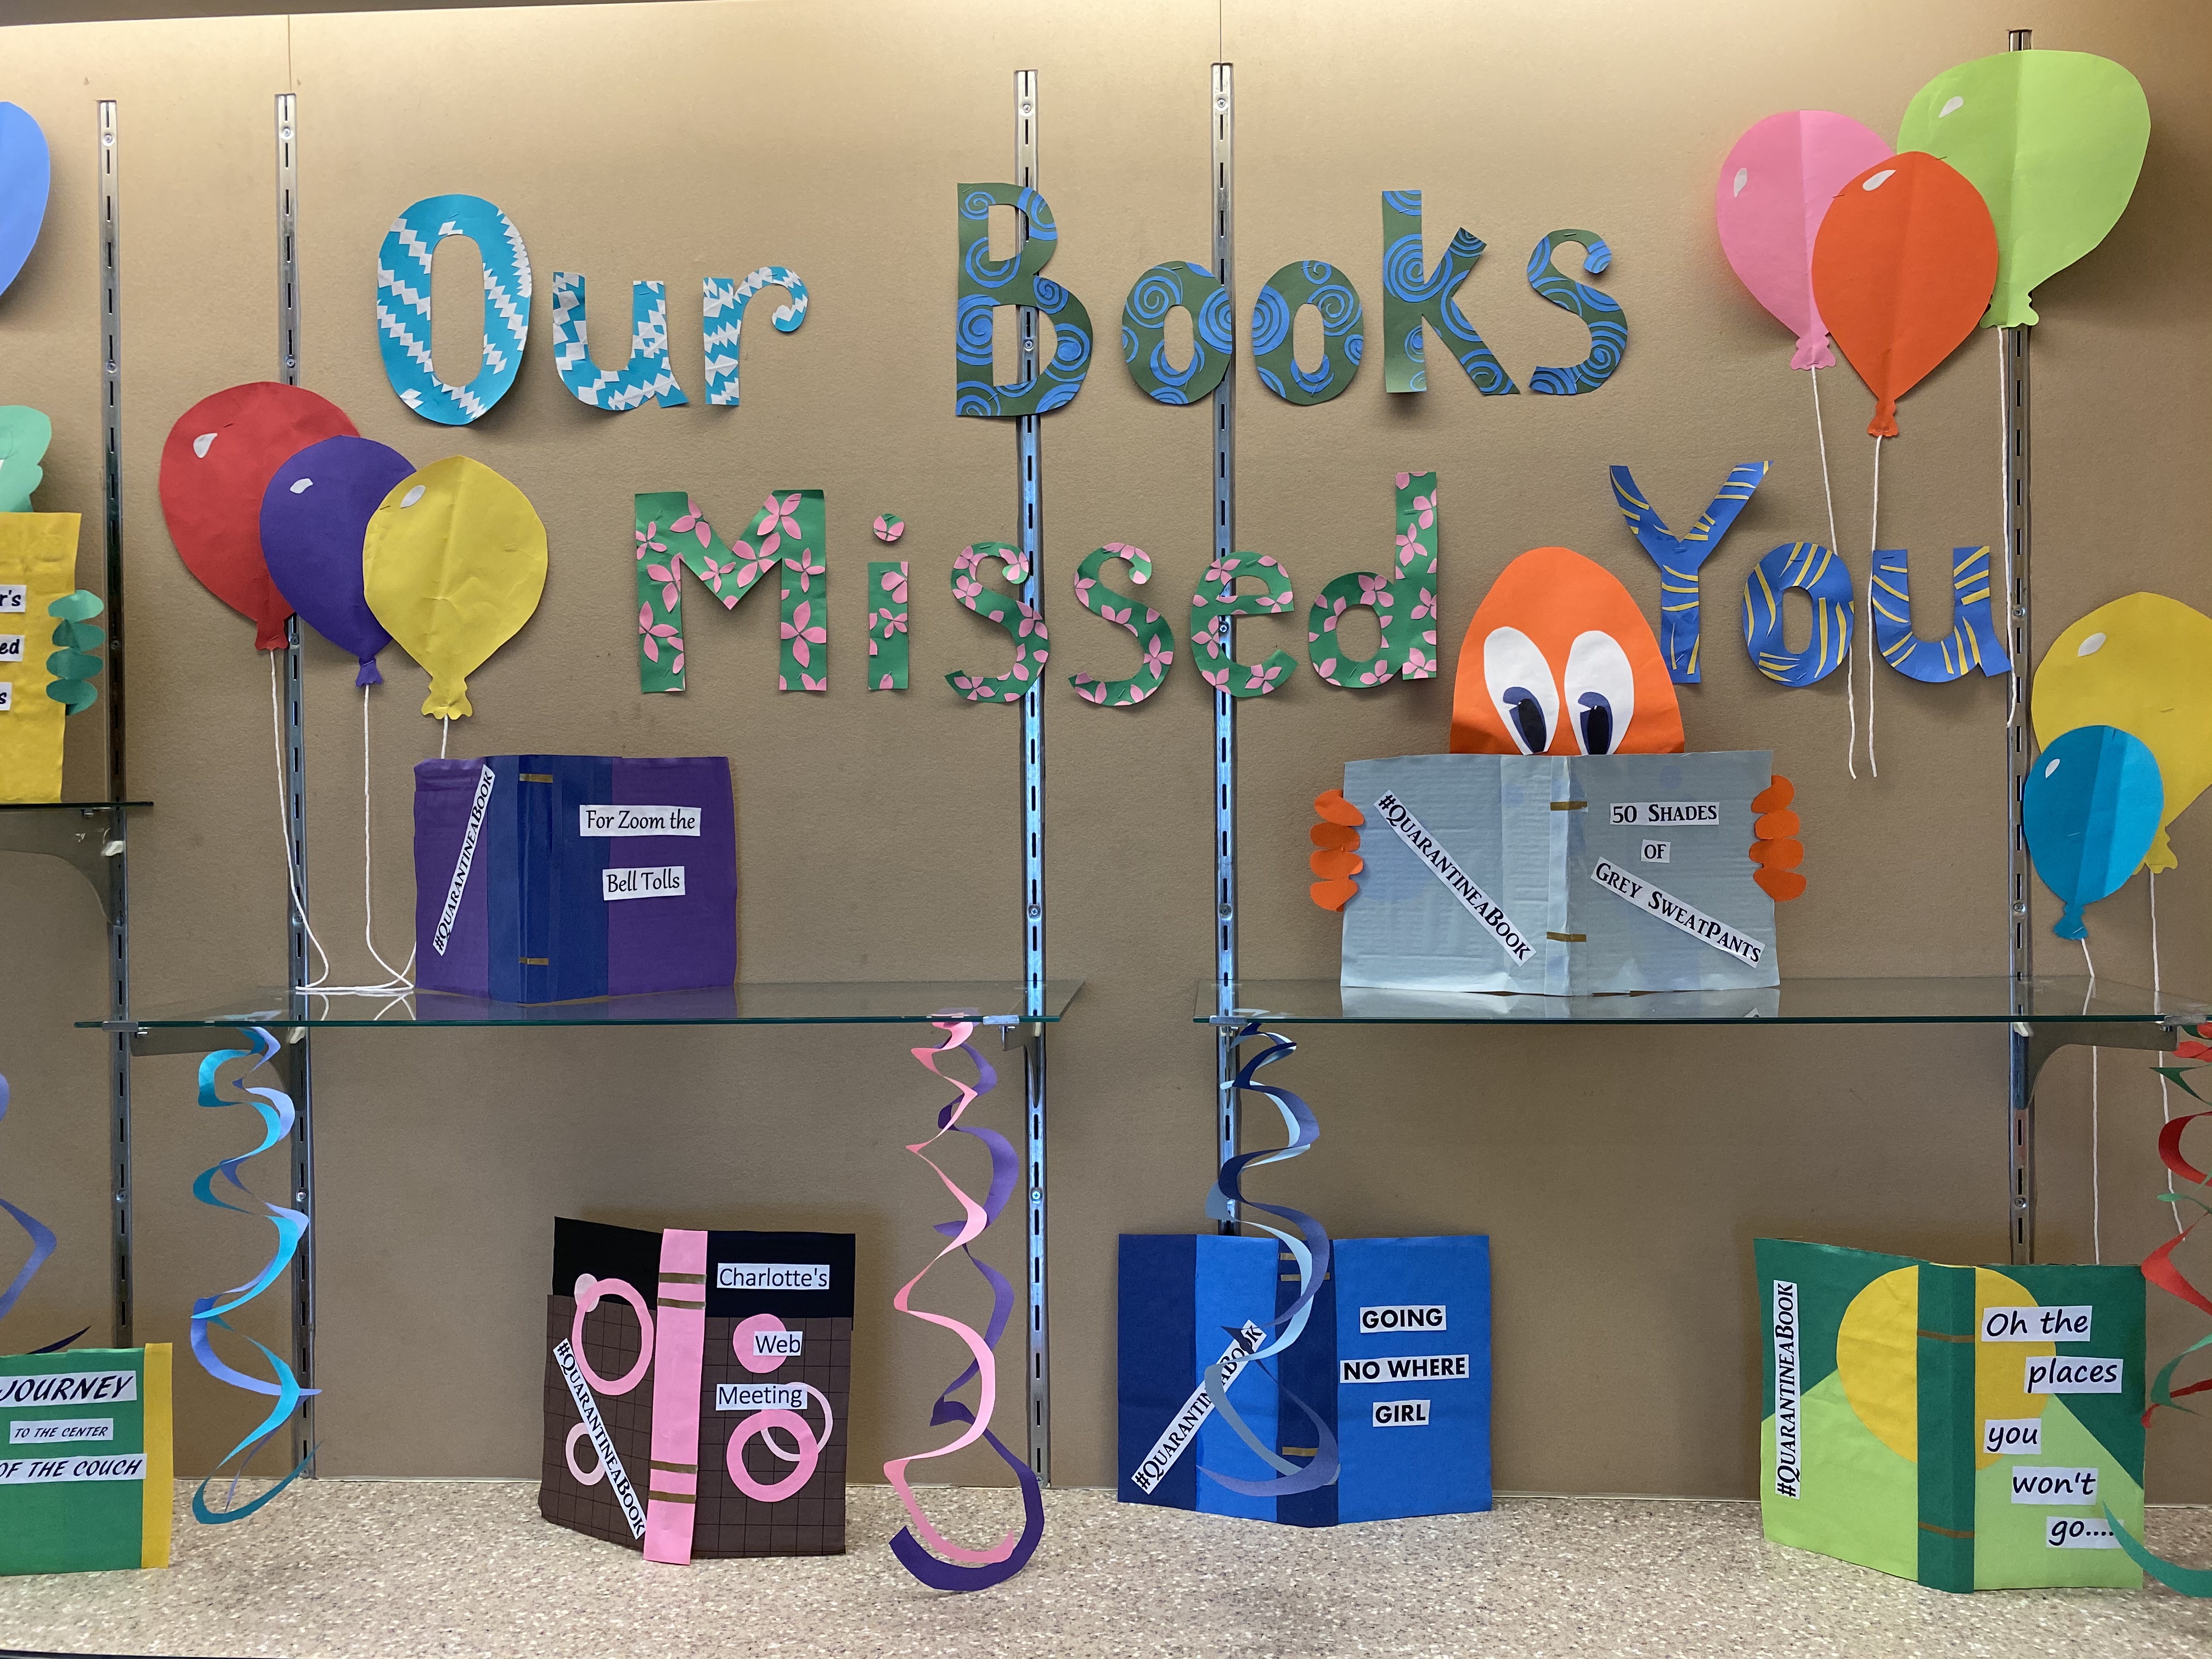 The display case at lake station new chicago branch with paper decorations of books and paper letters spelling Our Books Missed You